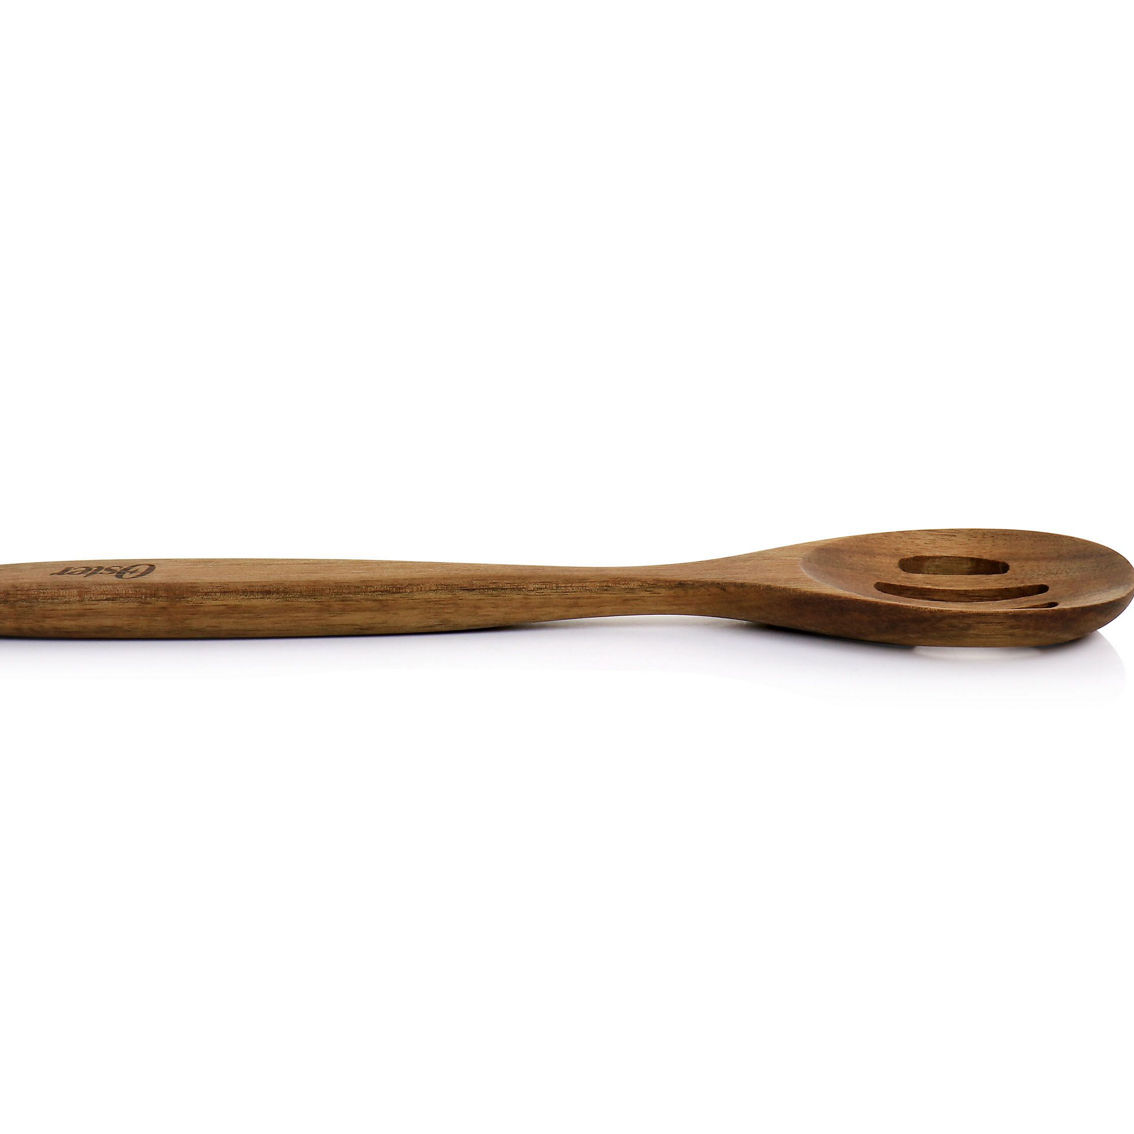 Oster Acacia Wood Slotted Spoon Cooking Utensil - Image 3 of 5